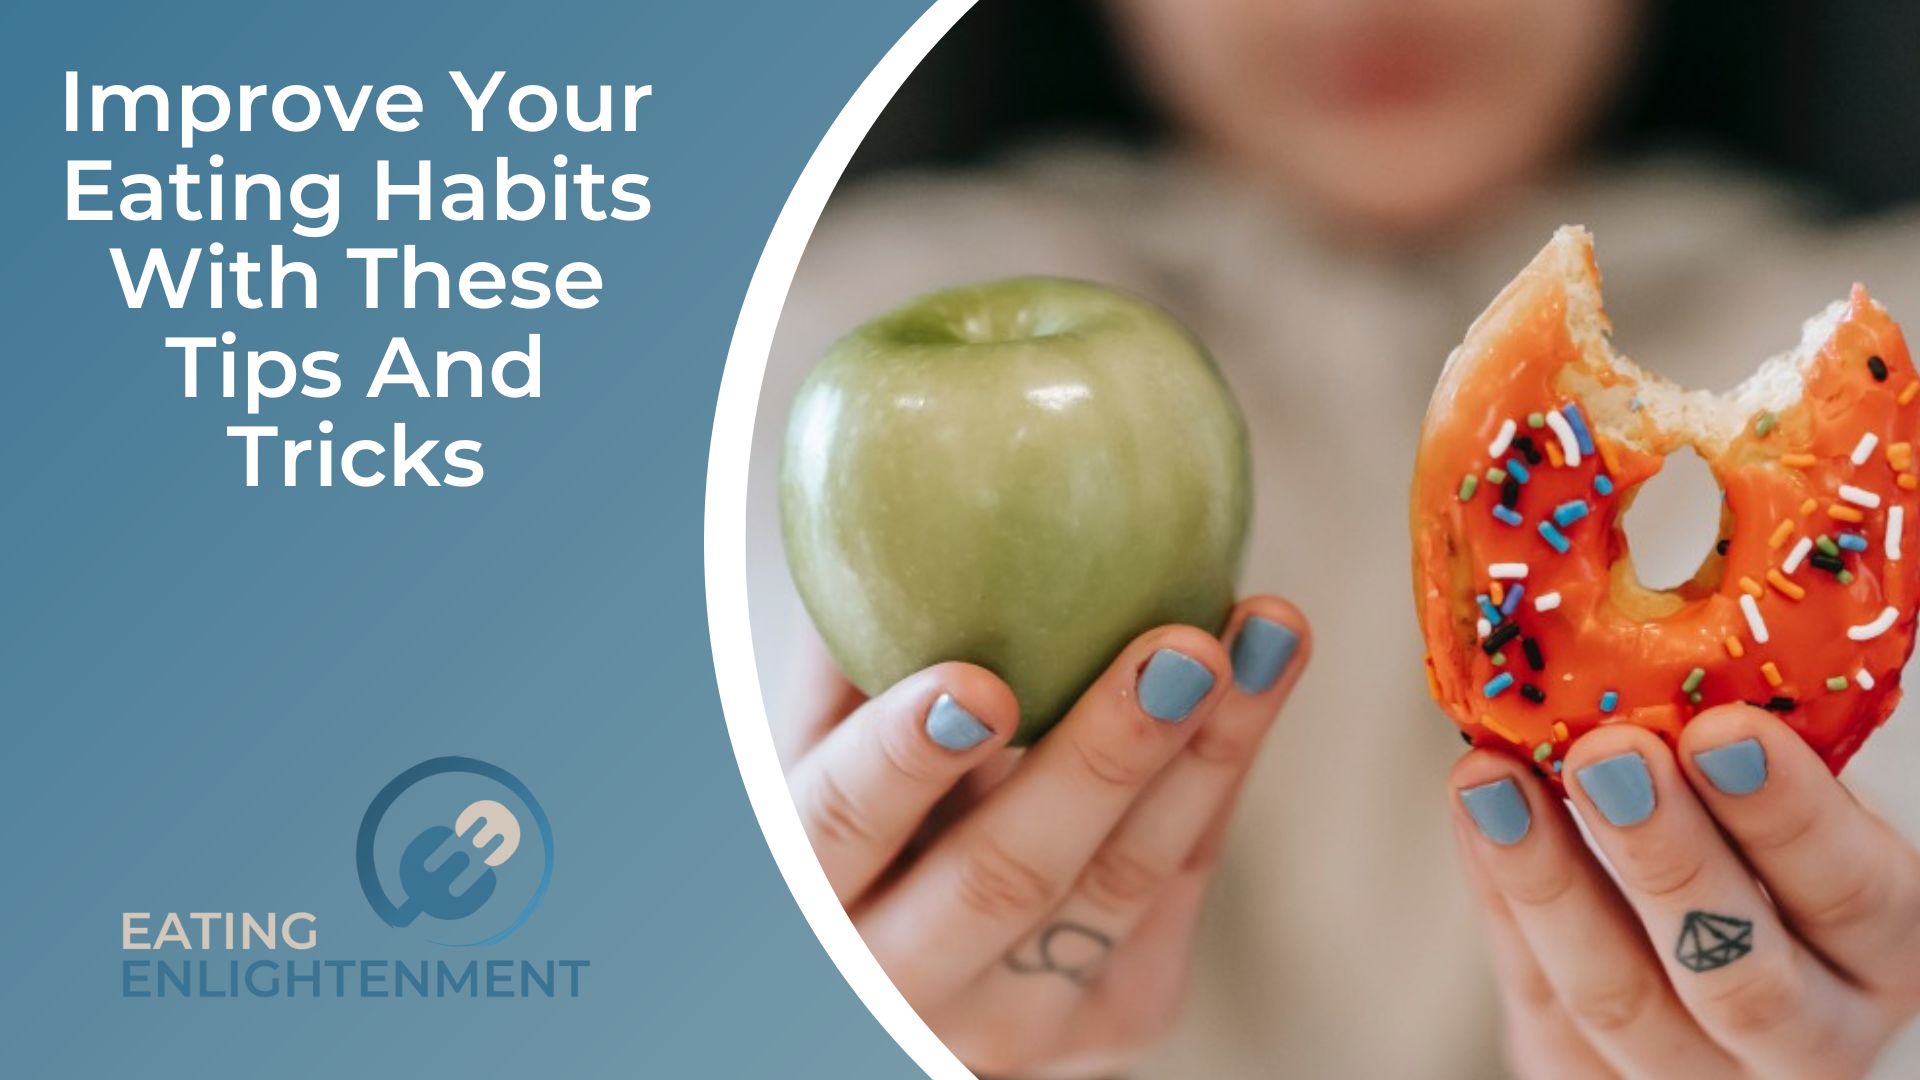 Improve Your Eating Habits With These Tips And Tricks